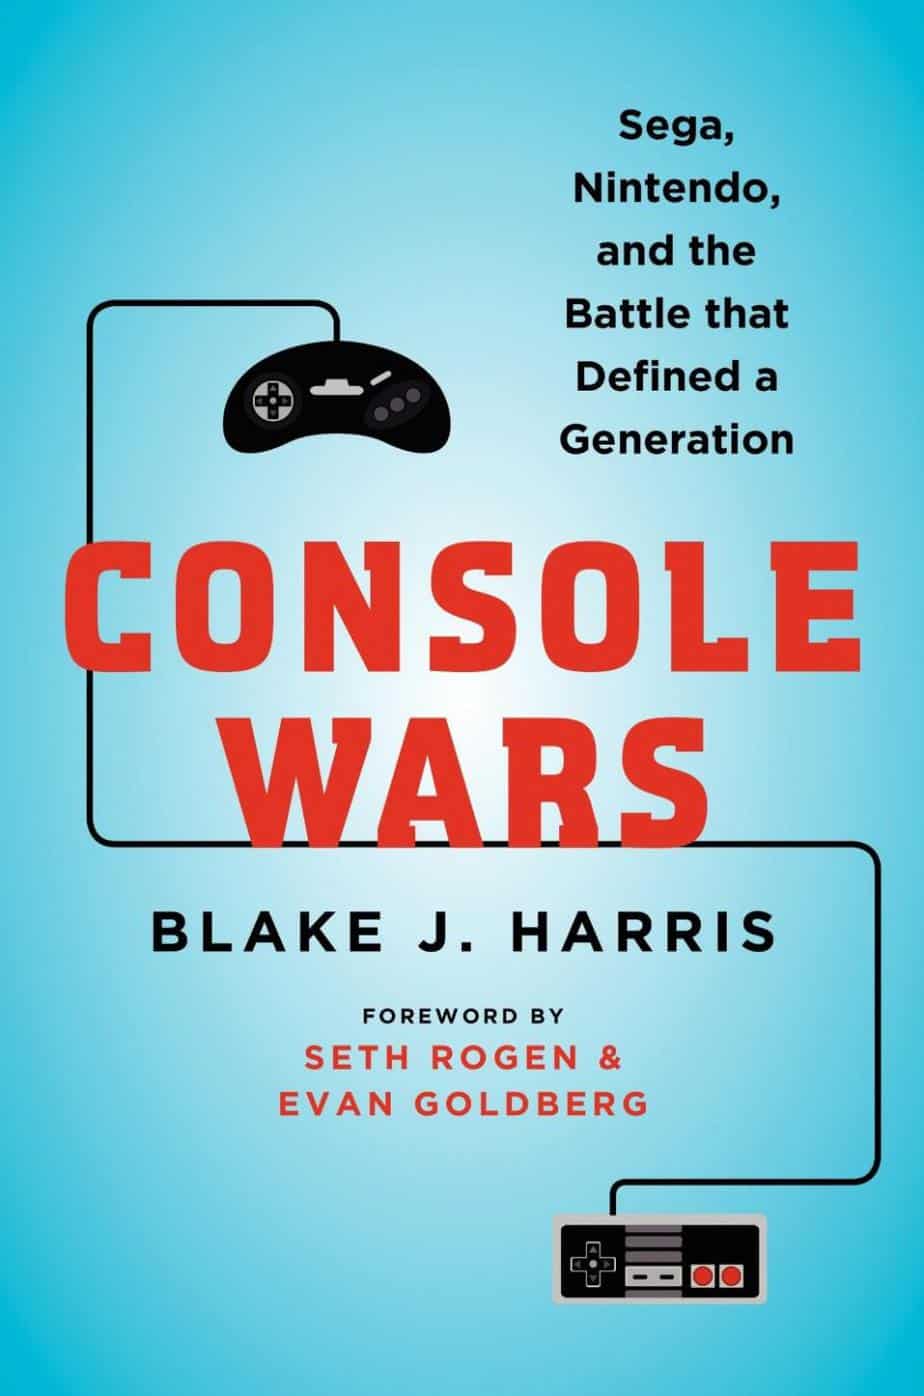 Best Gaming Books - Console Wars: Sega VS Nintendo - And The Battle That Defined A Generation